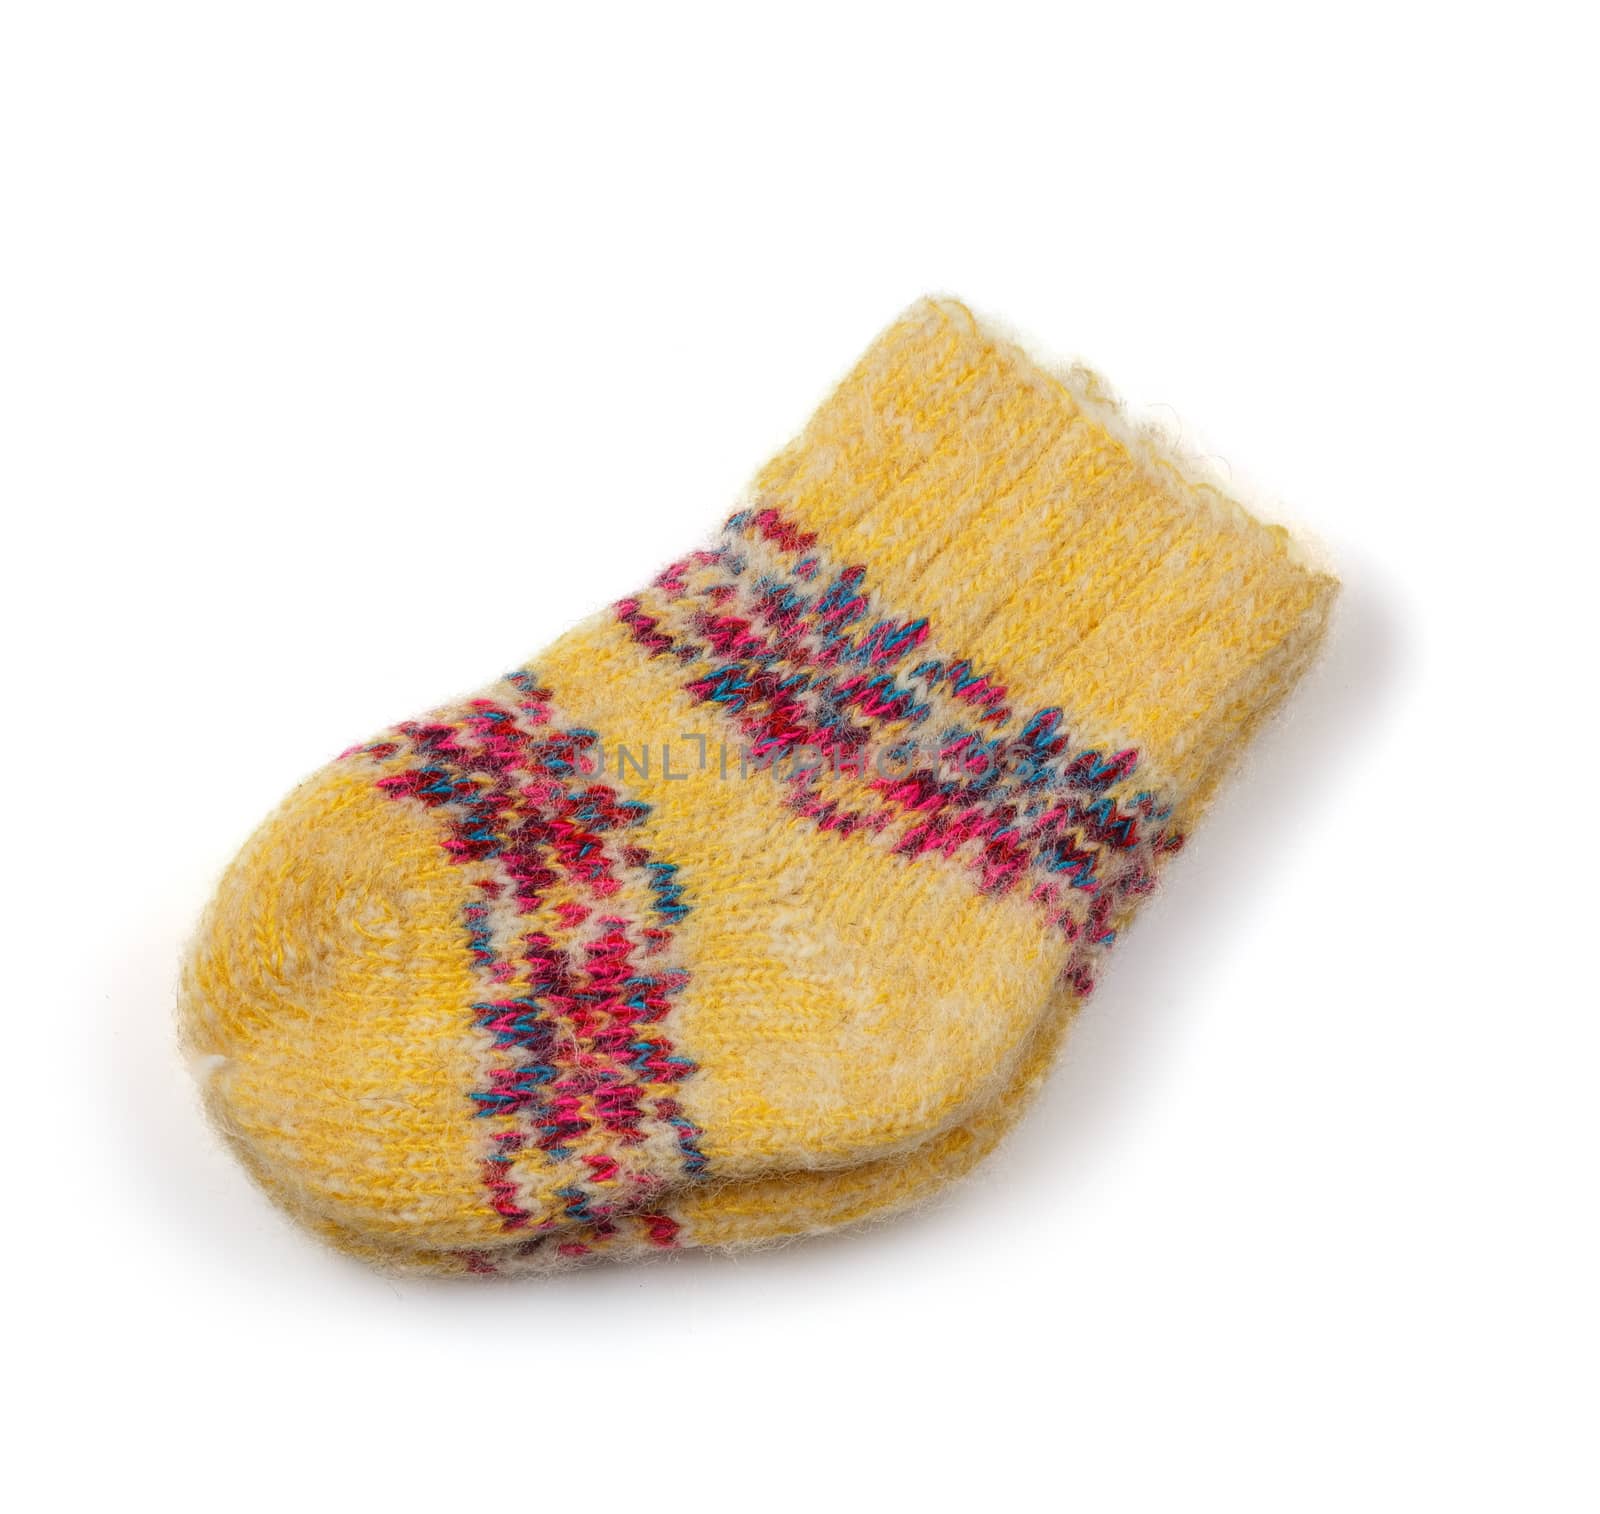 knitted woolen socks on a white background